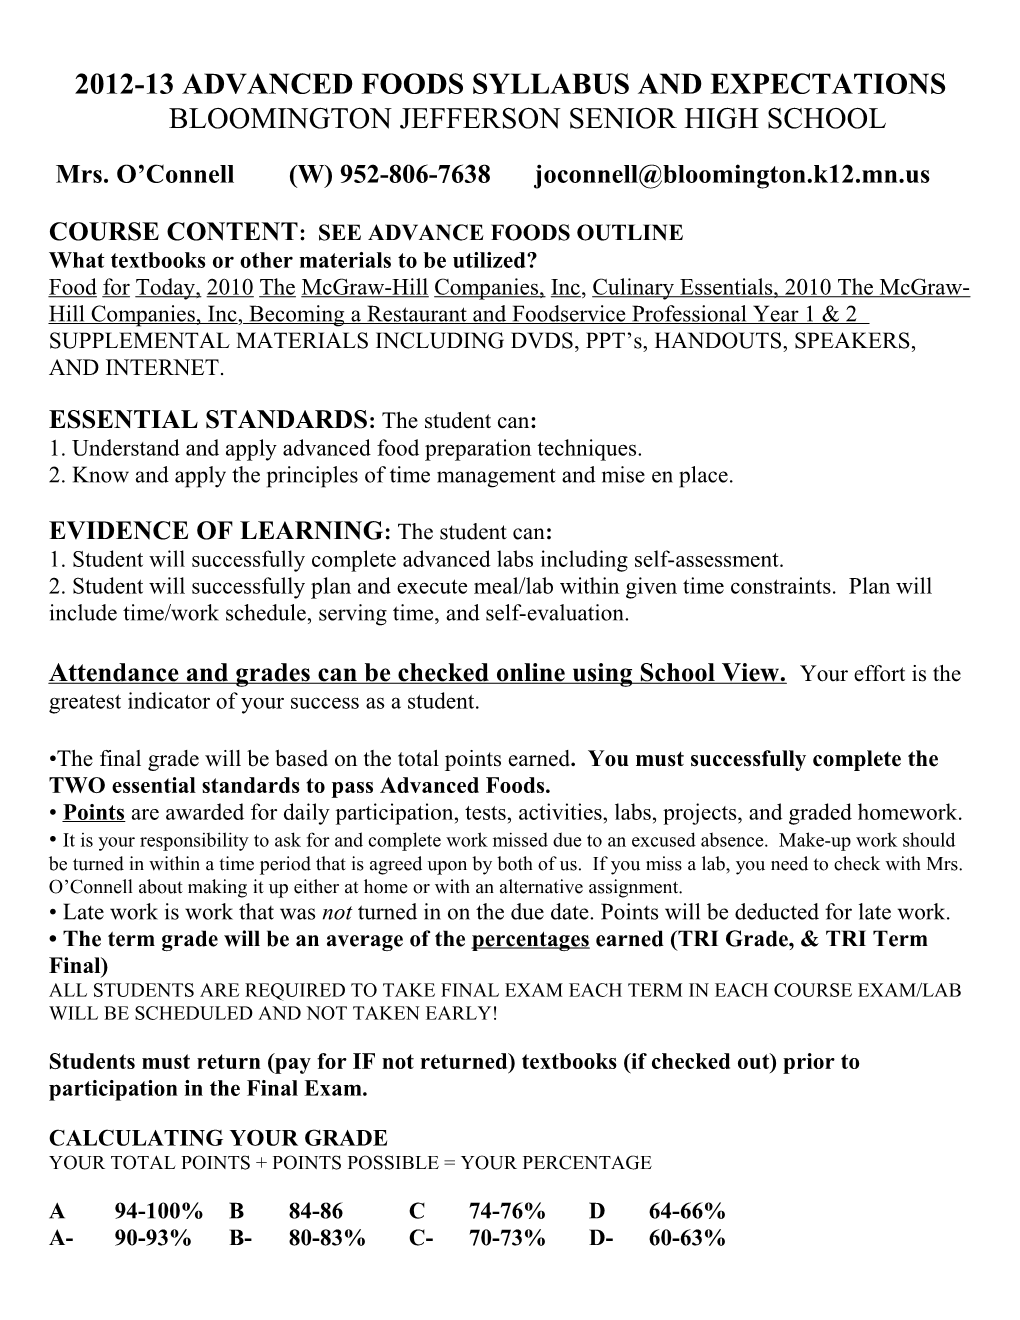 2012-13 Advanced Foods Syllabus and Expectations